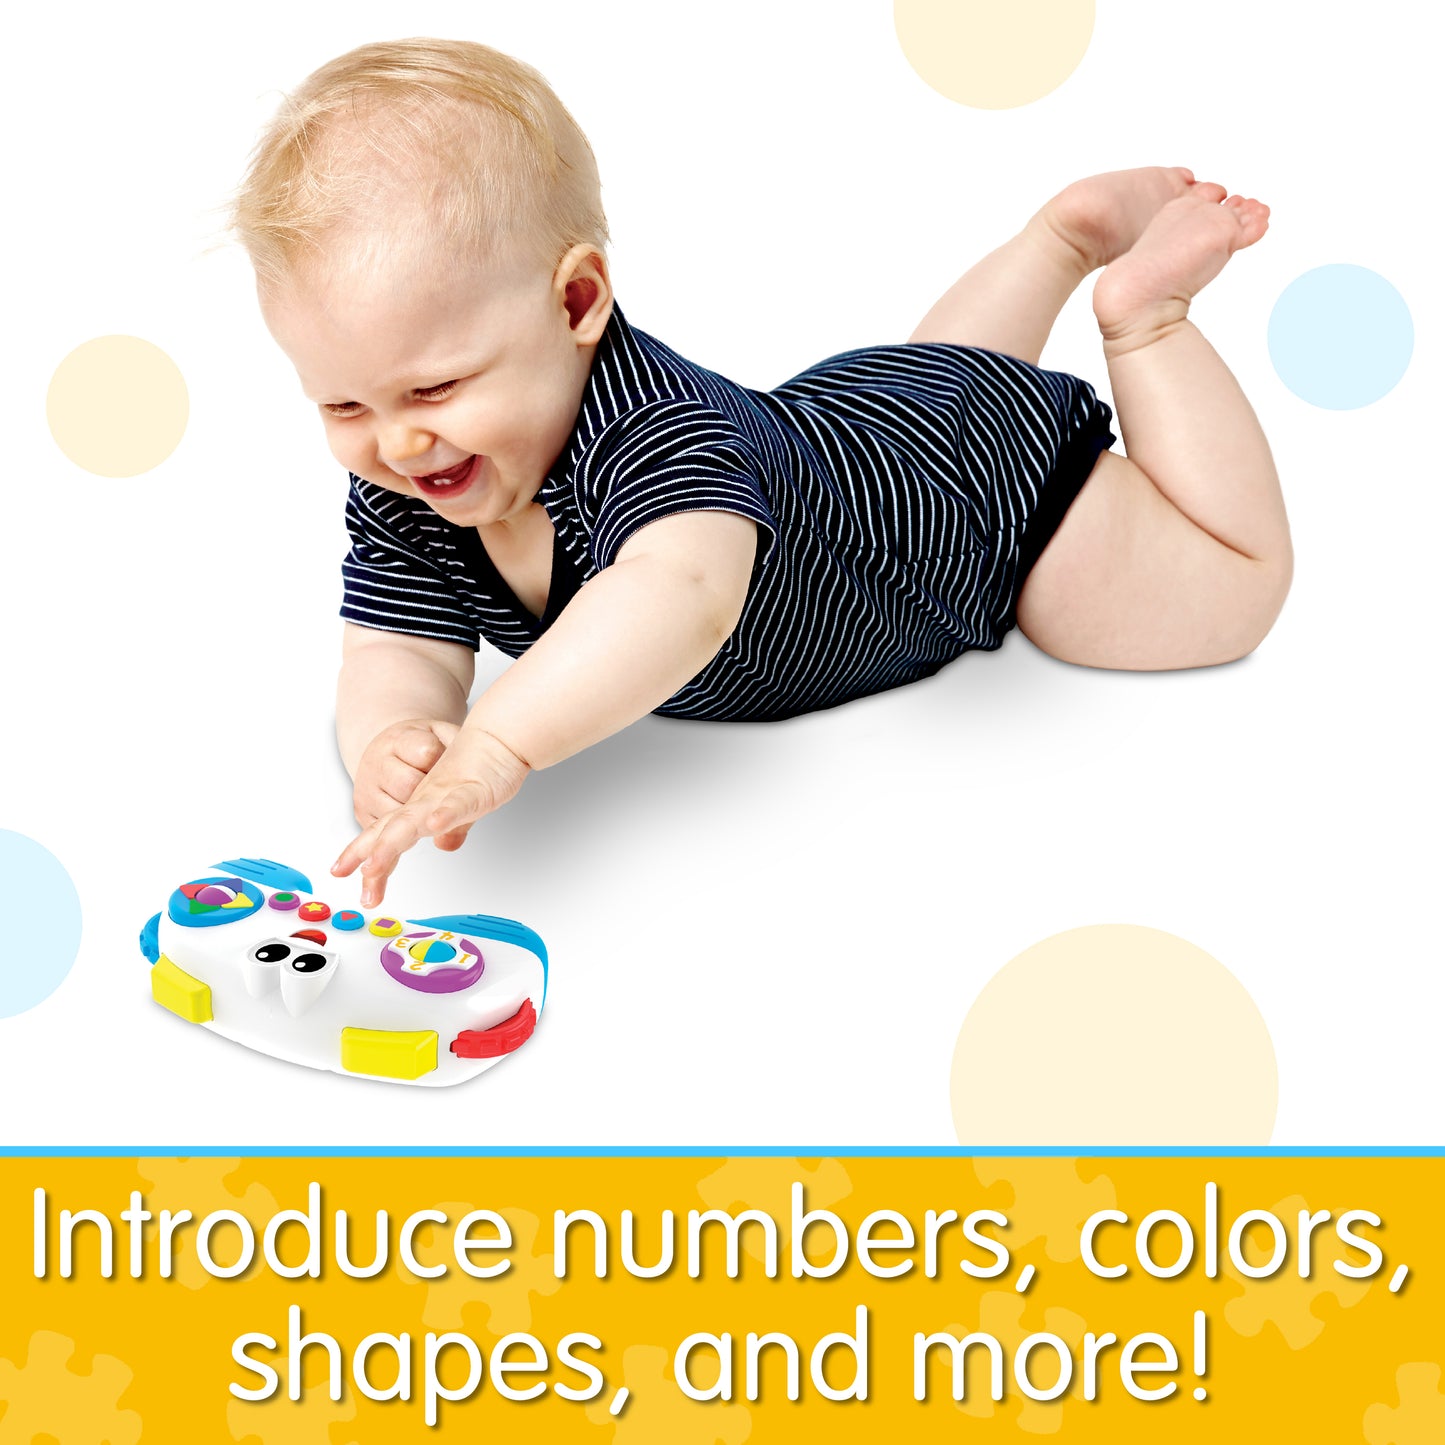 Infographic about On The Go Controller that says, "Introduce numbers, colors, shapes, and more!"